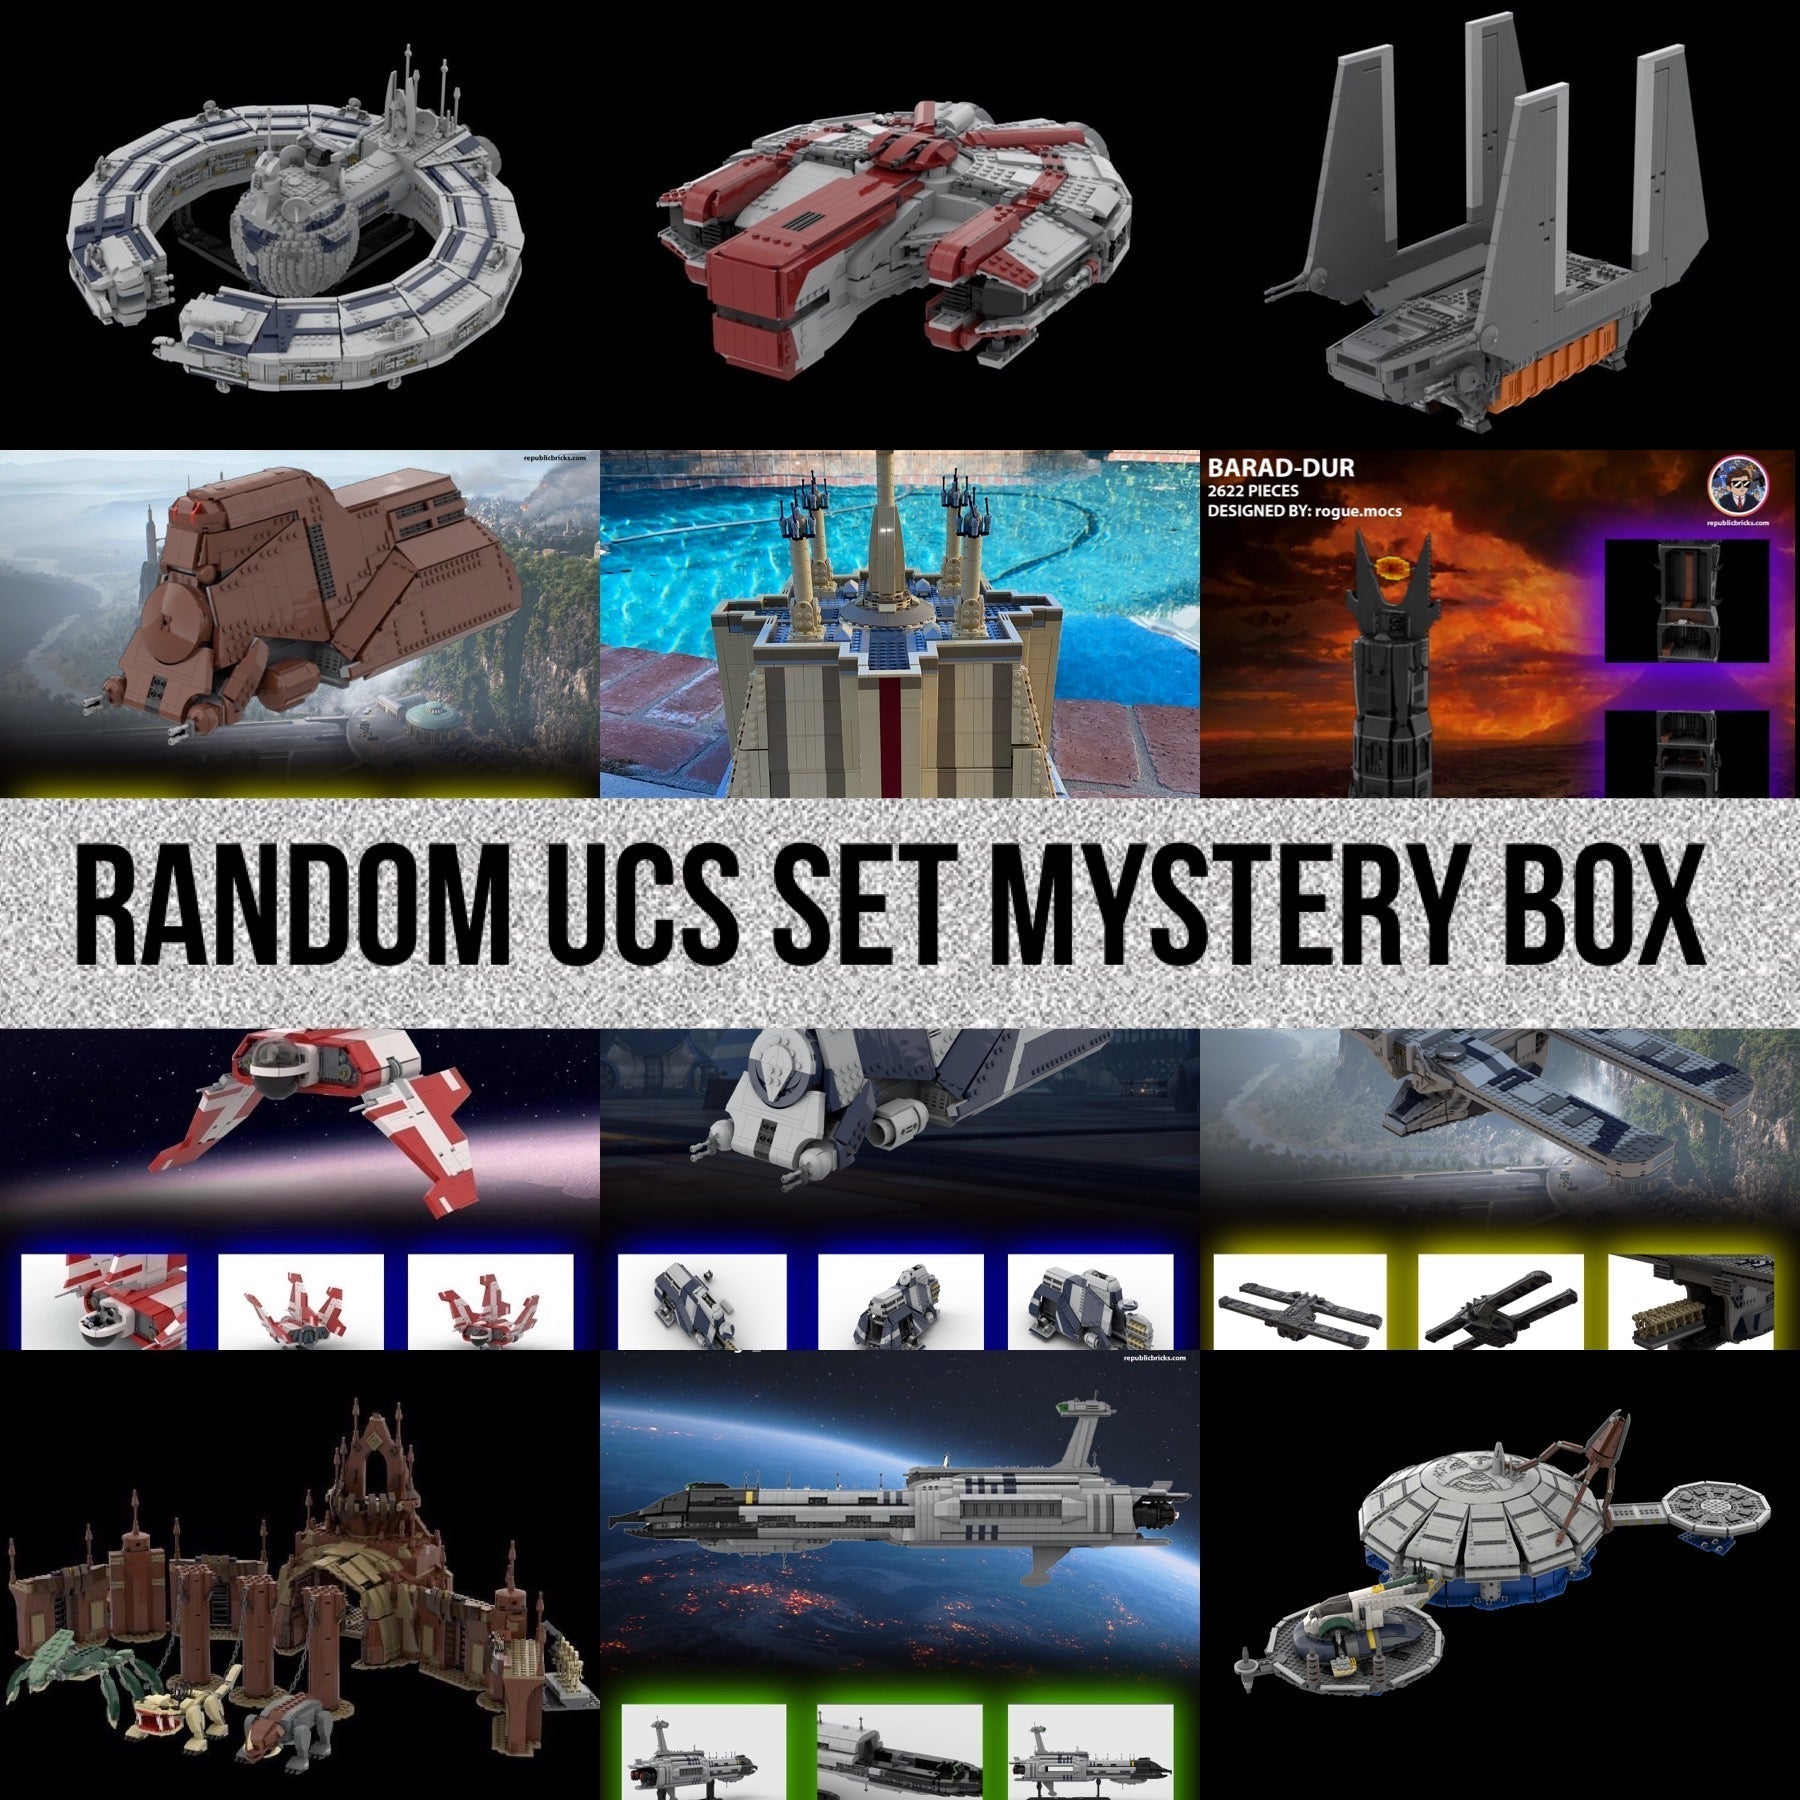 DELUXE UCS SET MYSTERY BOX $300 VALUE